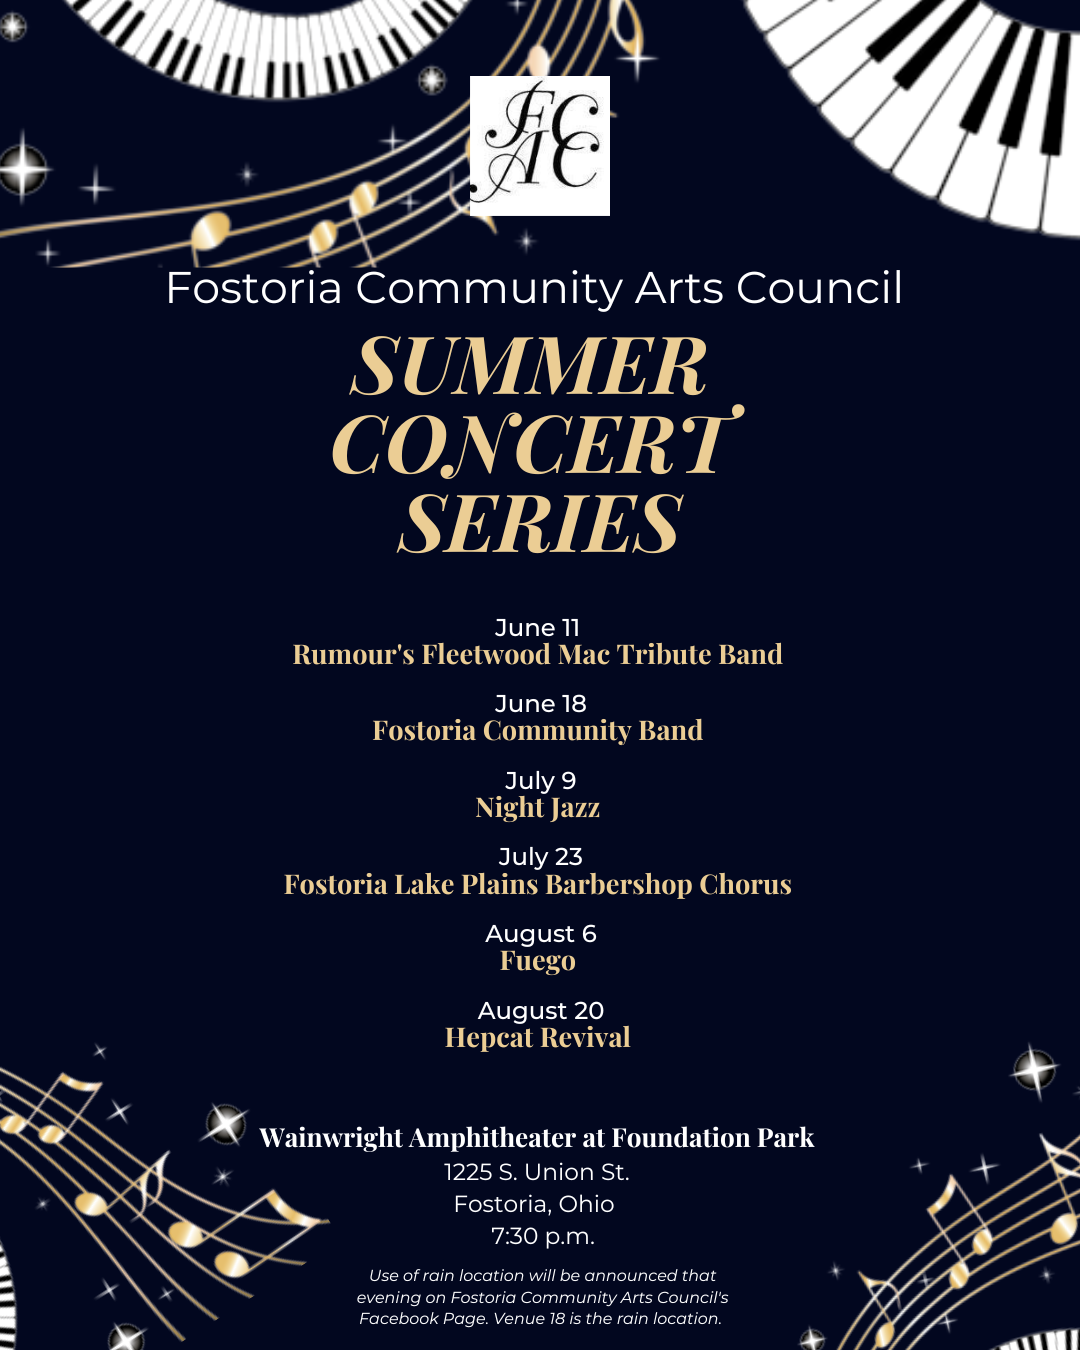 FCAC Summer Concert Series -  Hepeat Revival